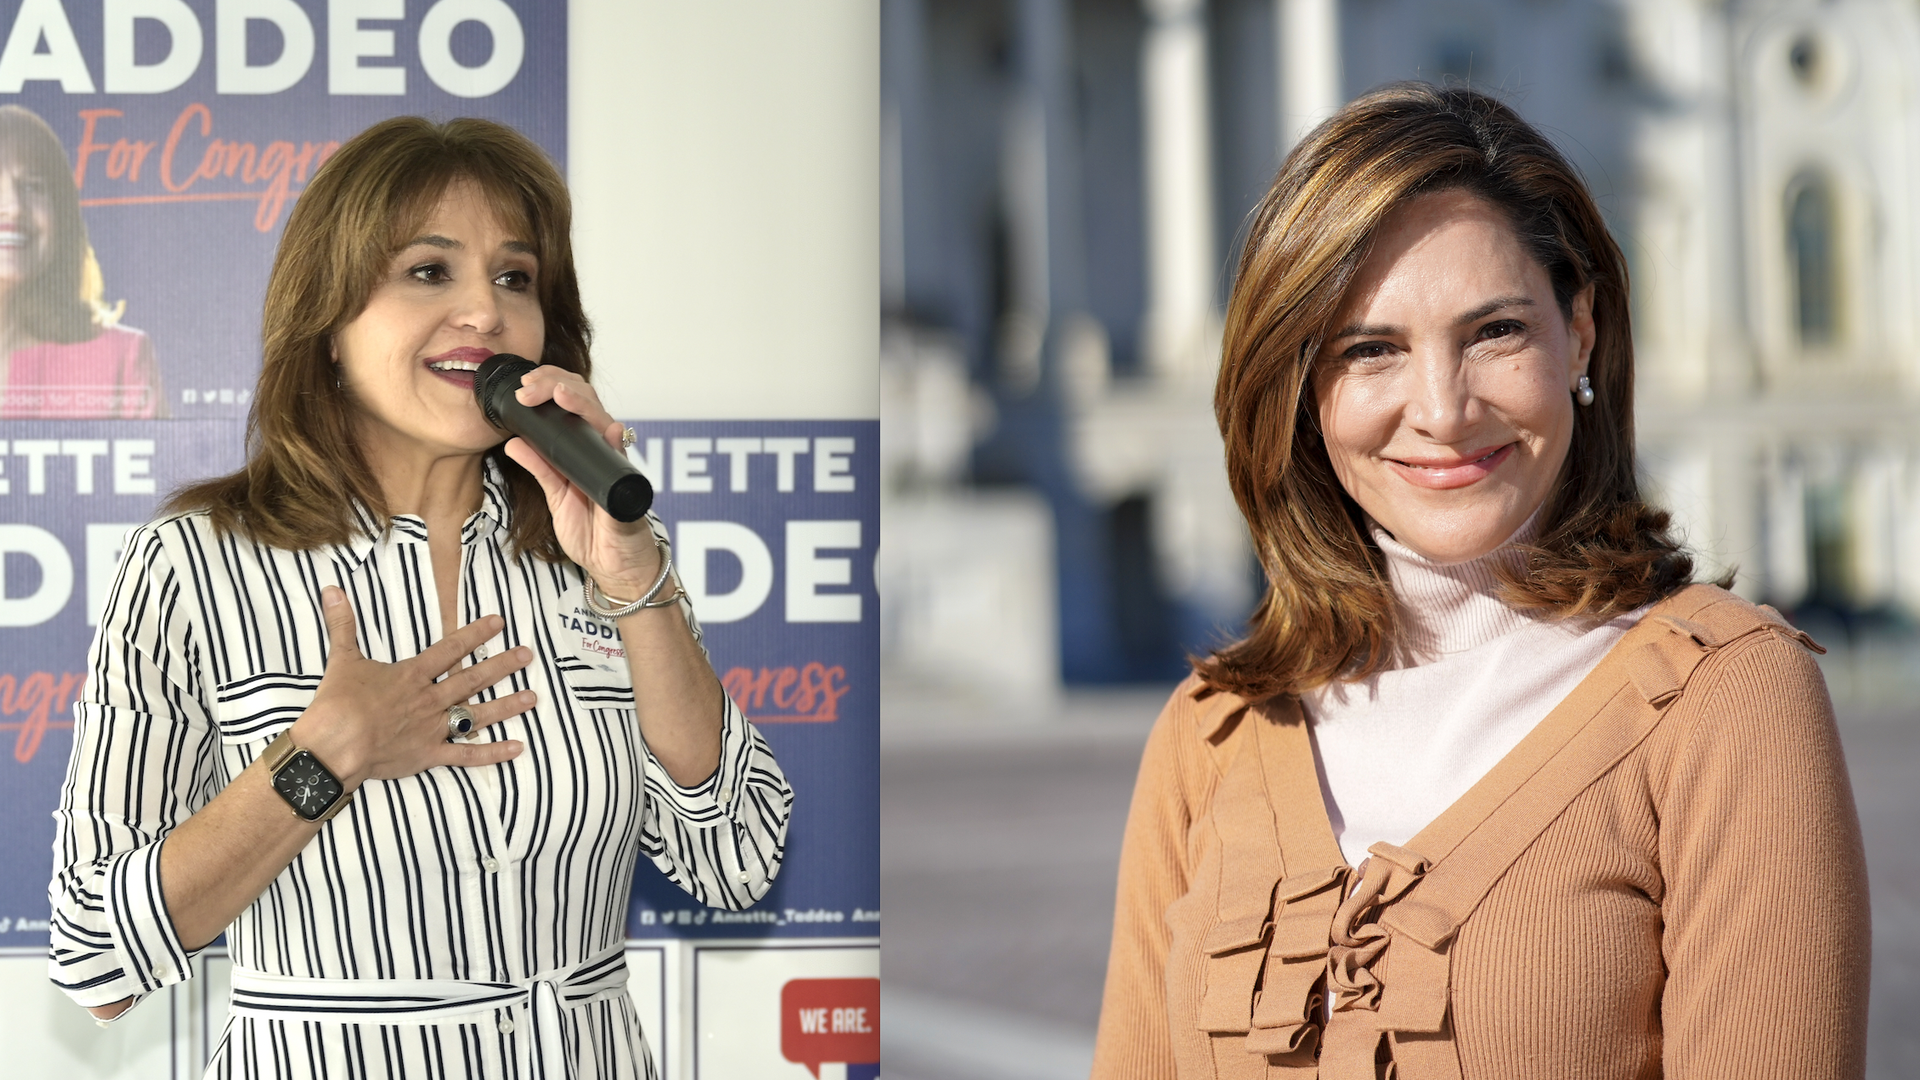 Democratic challenger Annette Taddeo and US Rep. Maria Elvira Salazar (R-FL) side-by-side in two different photos.